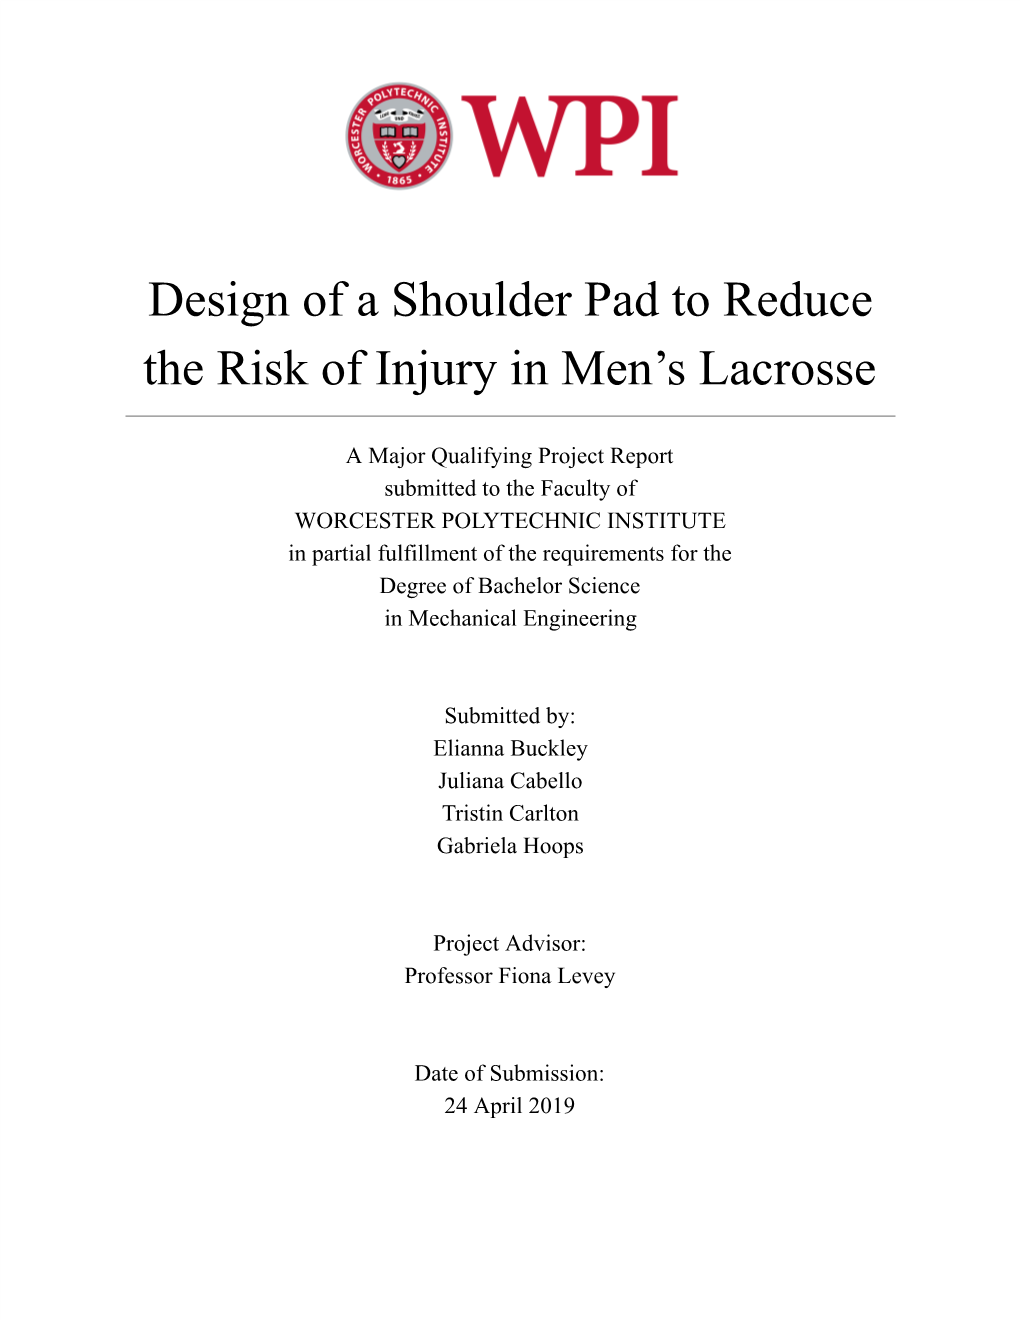 Design of a Shoulder Pad to Reduce the Risk of Injury in Men's Lacrosse